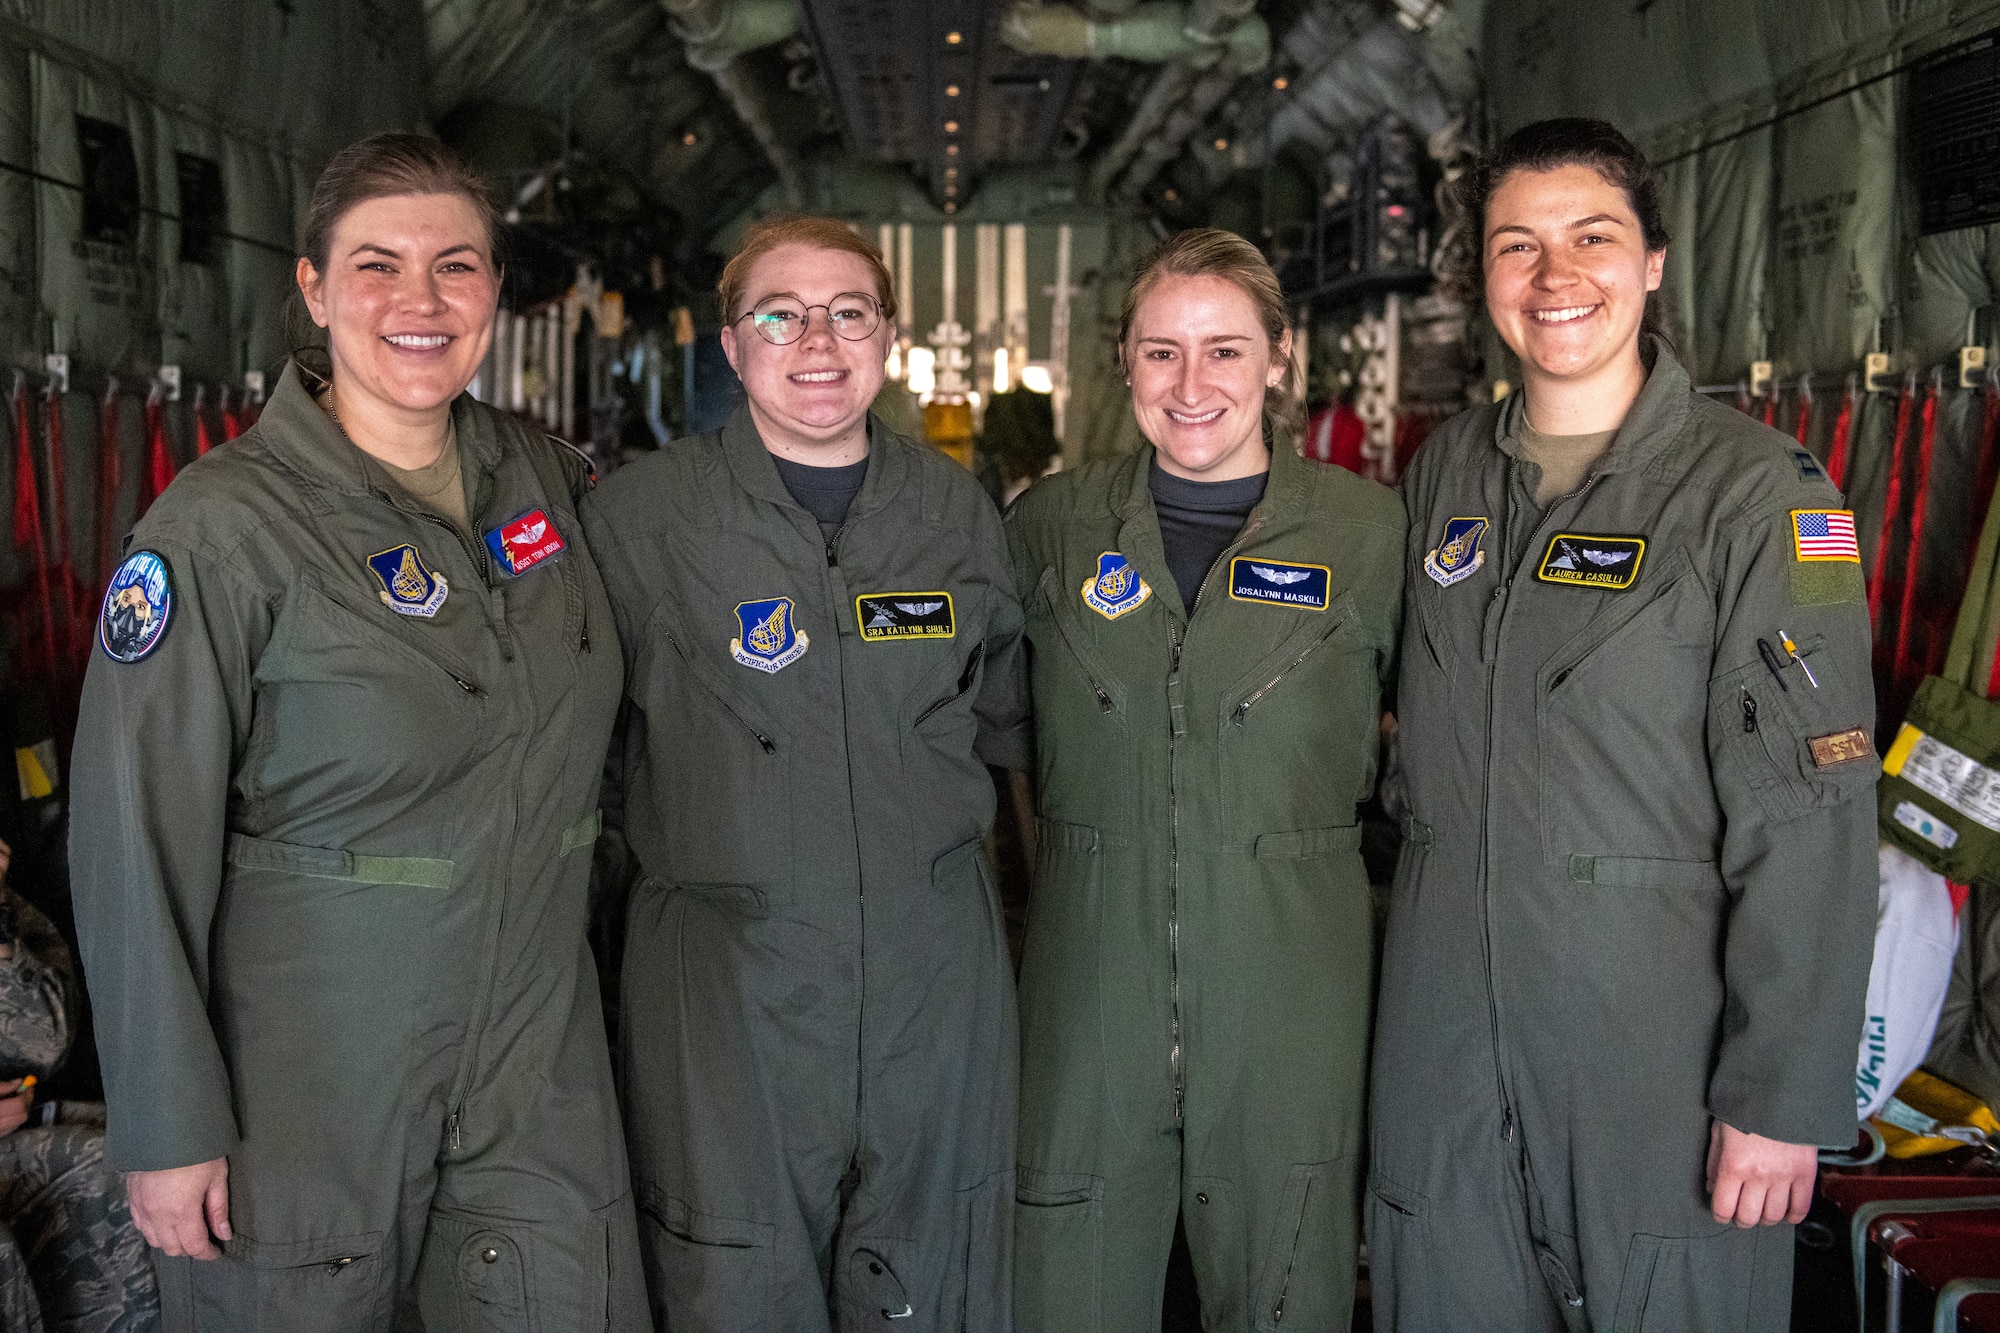 Female aviators of the 36th Airlift Squadron pose for a photo during an annual ‘Fly Girls’ aviation event.